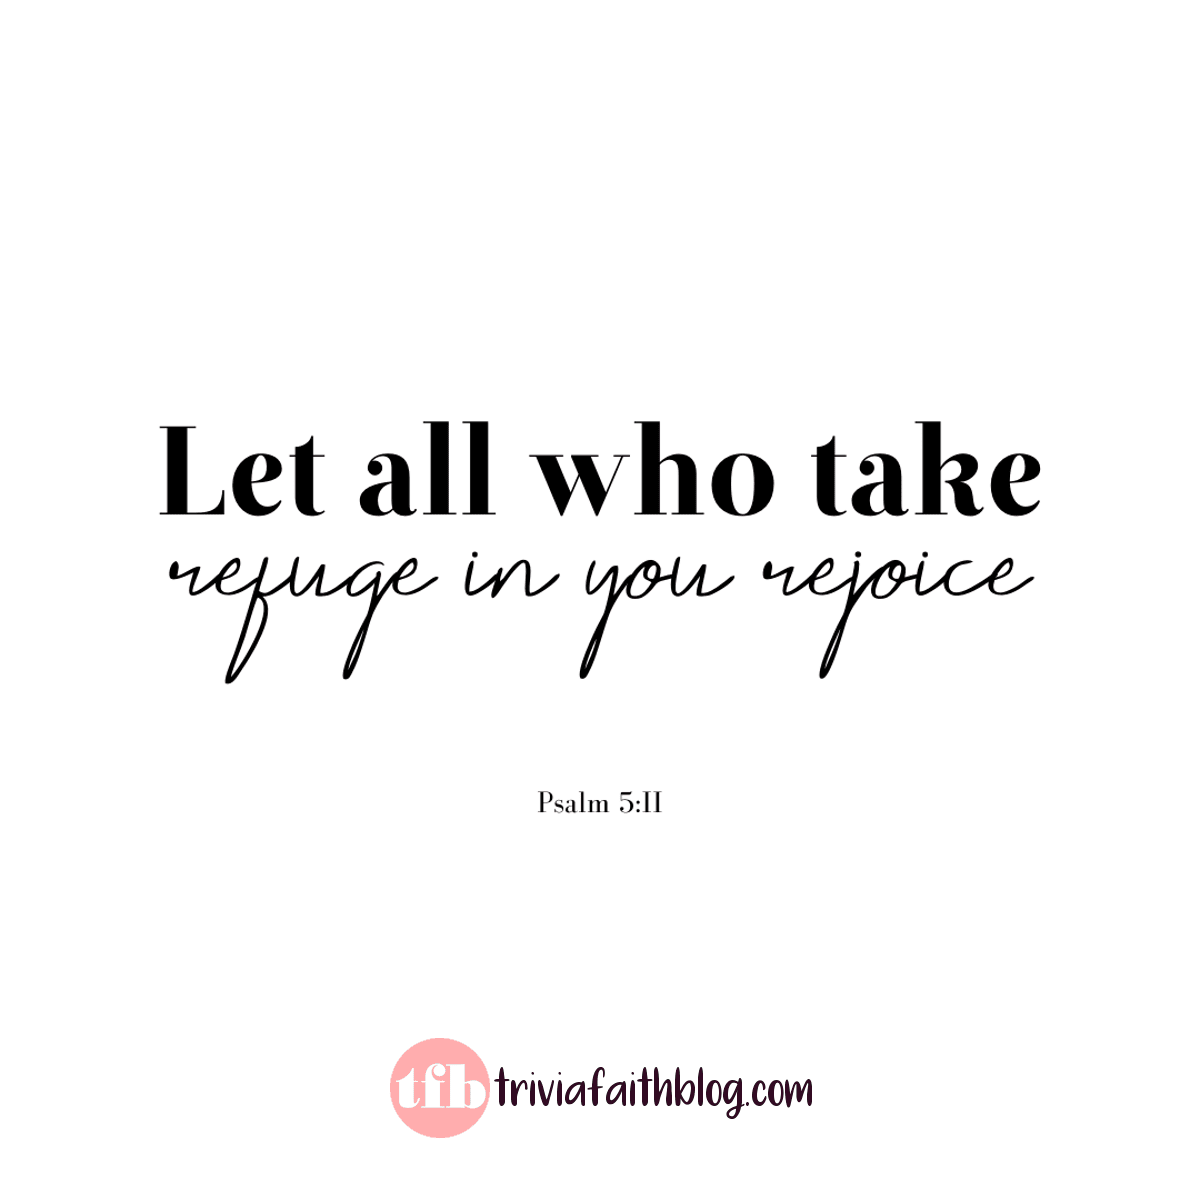 But let all who take refuge in you be glad